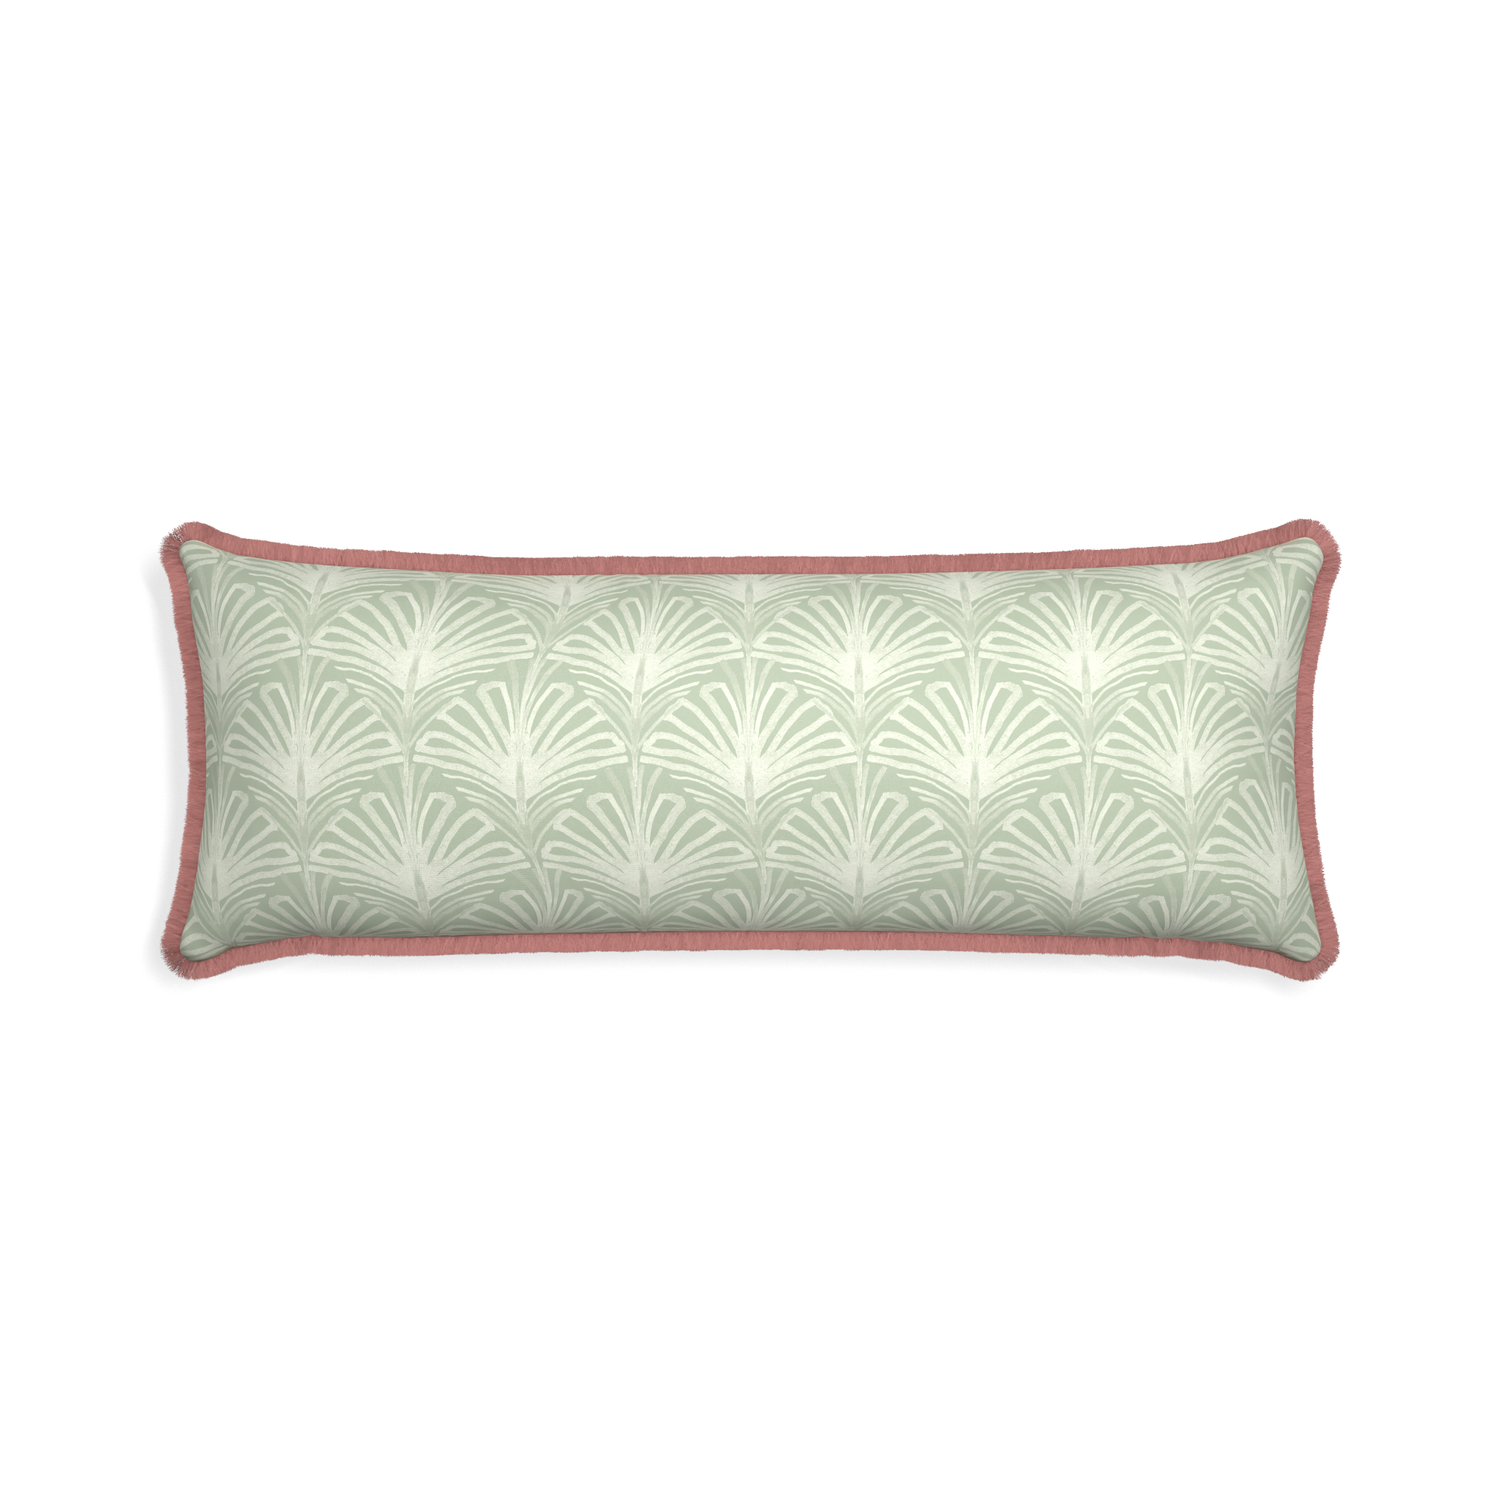 Xl-lumbar suzy sage custom pillow with d fringe on white background